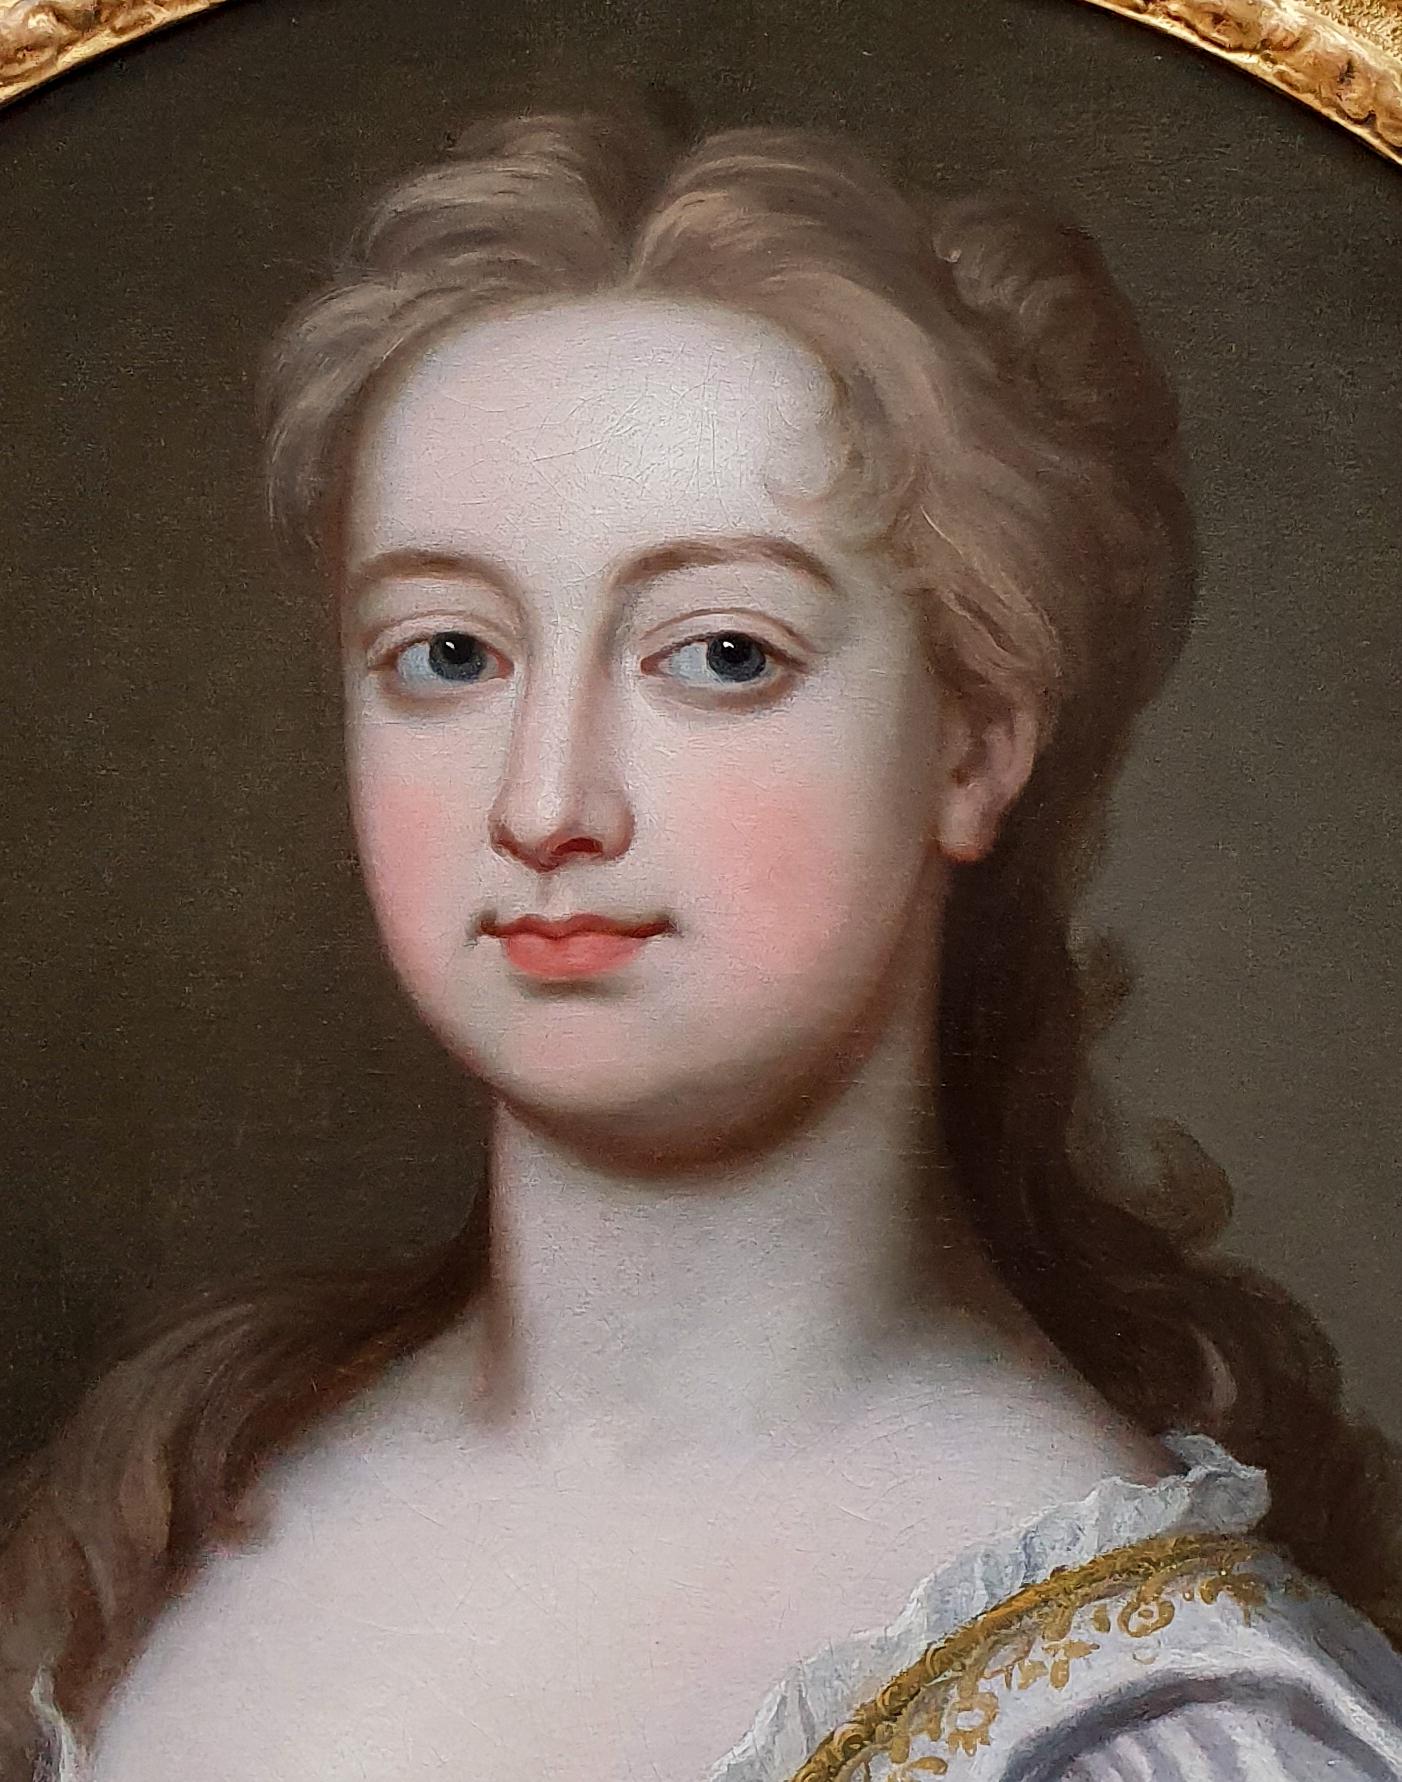 Titan Fine Art are pleased to present this charming picture which was painted circa 1725 - it is of a type favoured by the extraordinarily successful artist, Sir Godfrey Kneller.  The sitter has been portrayed in a luxurious silk dress with gold